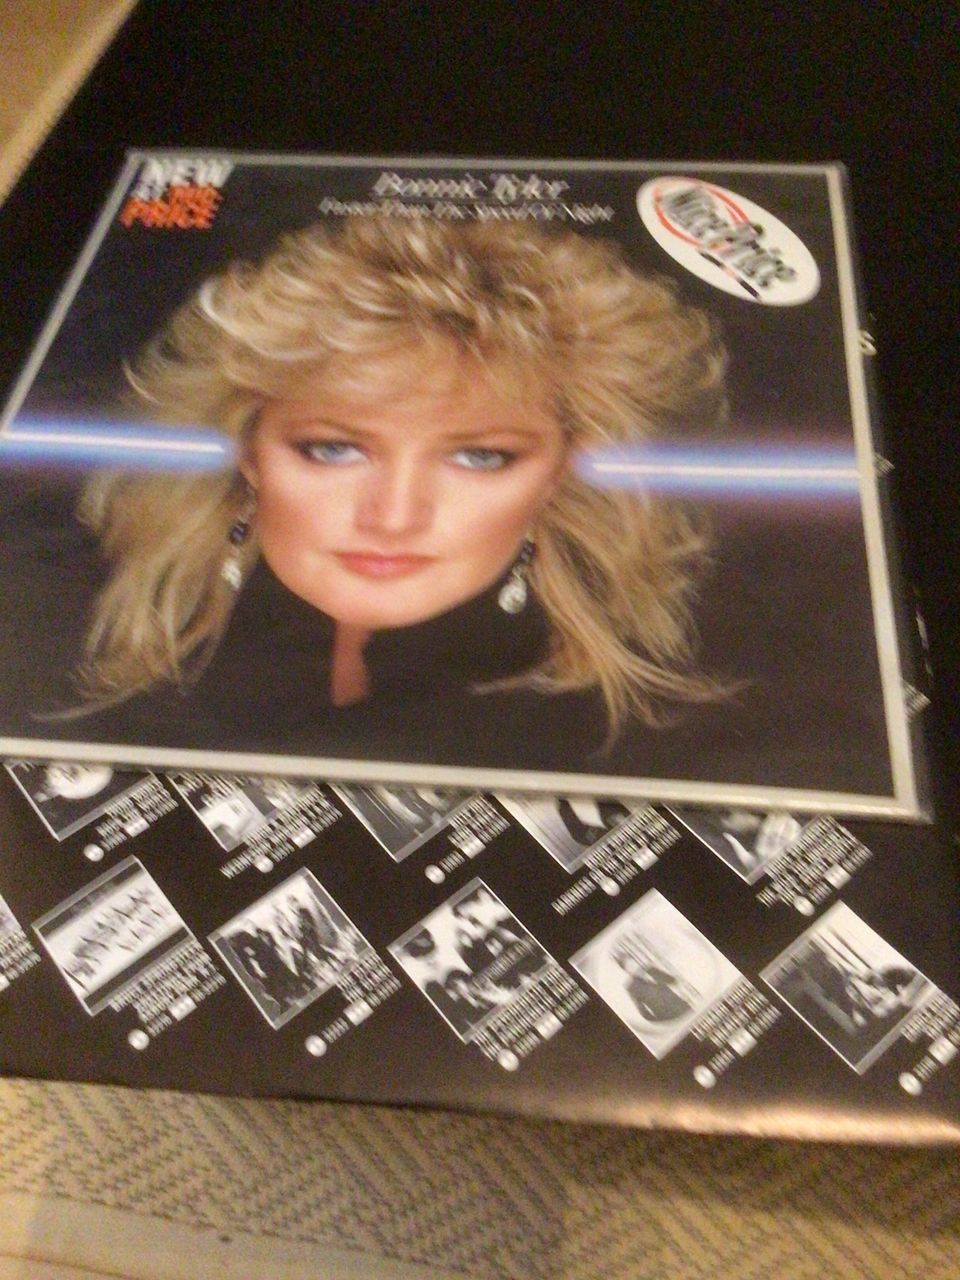 Bonnie Tyler-Faster than the speed of night lp